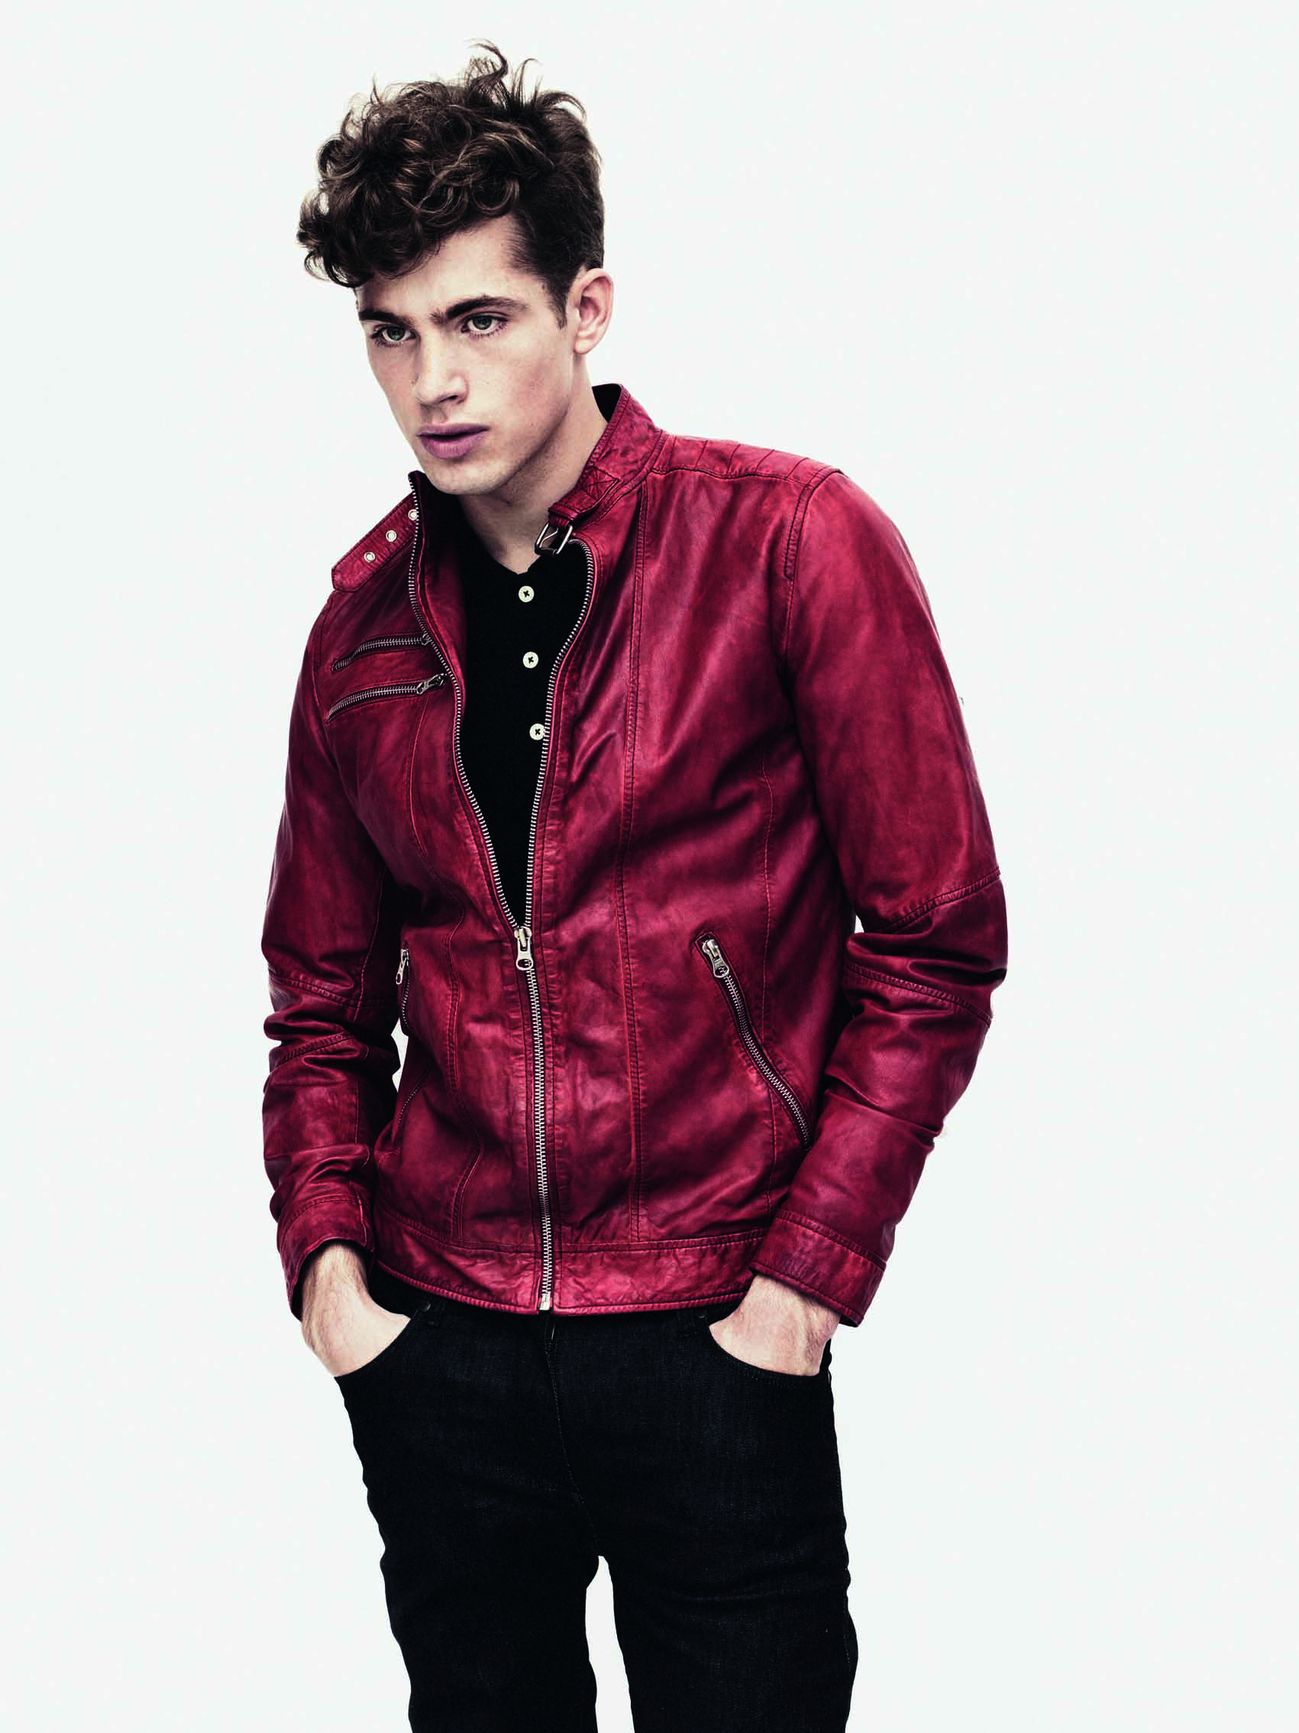  ... Jamie Wise poses for the fall winter ZARA Young campaign imagery